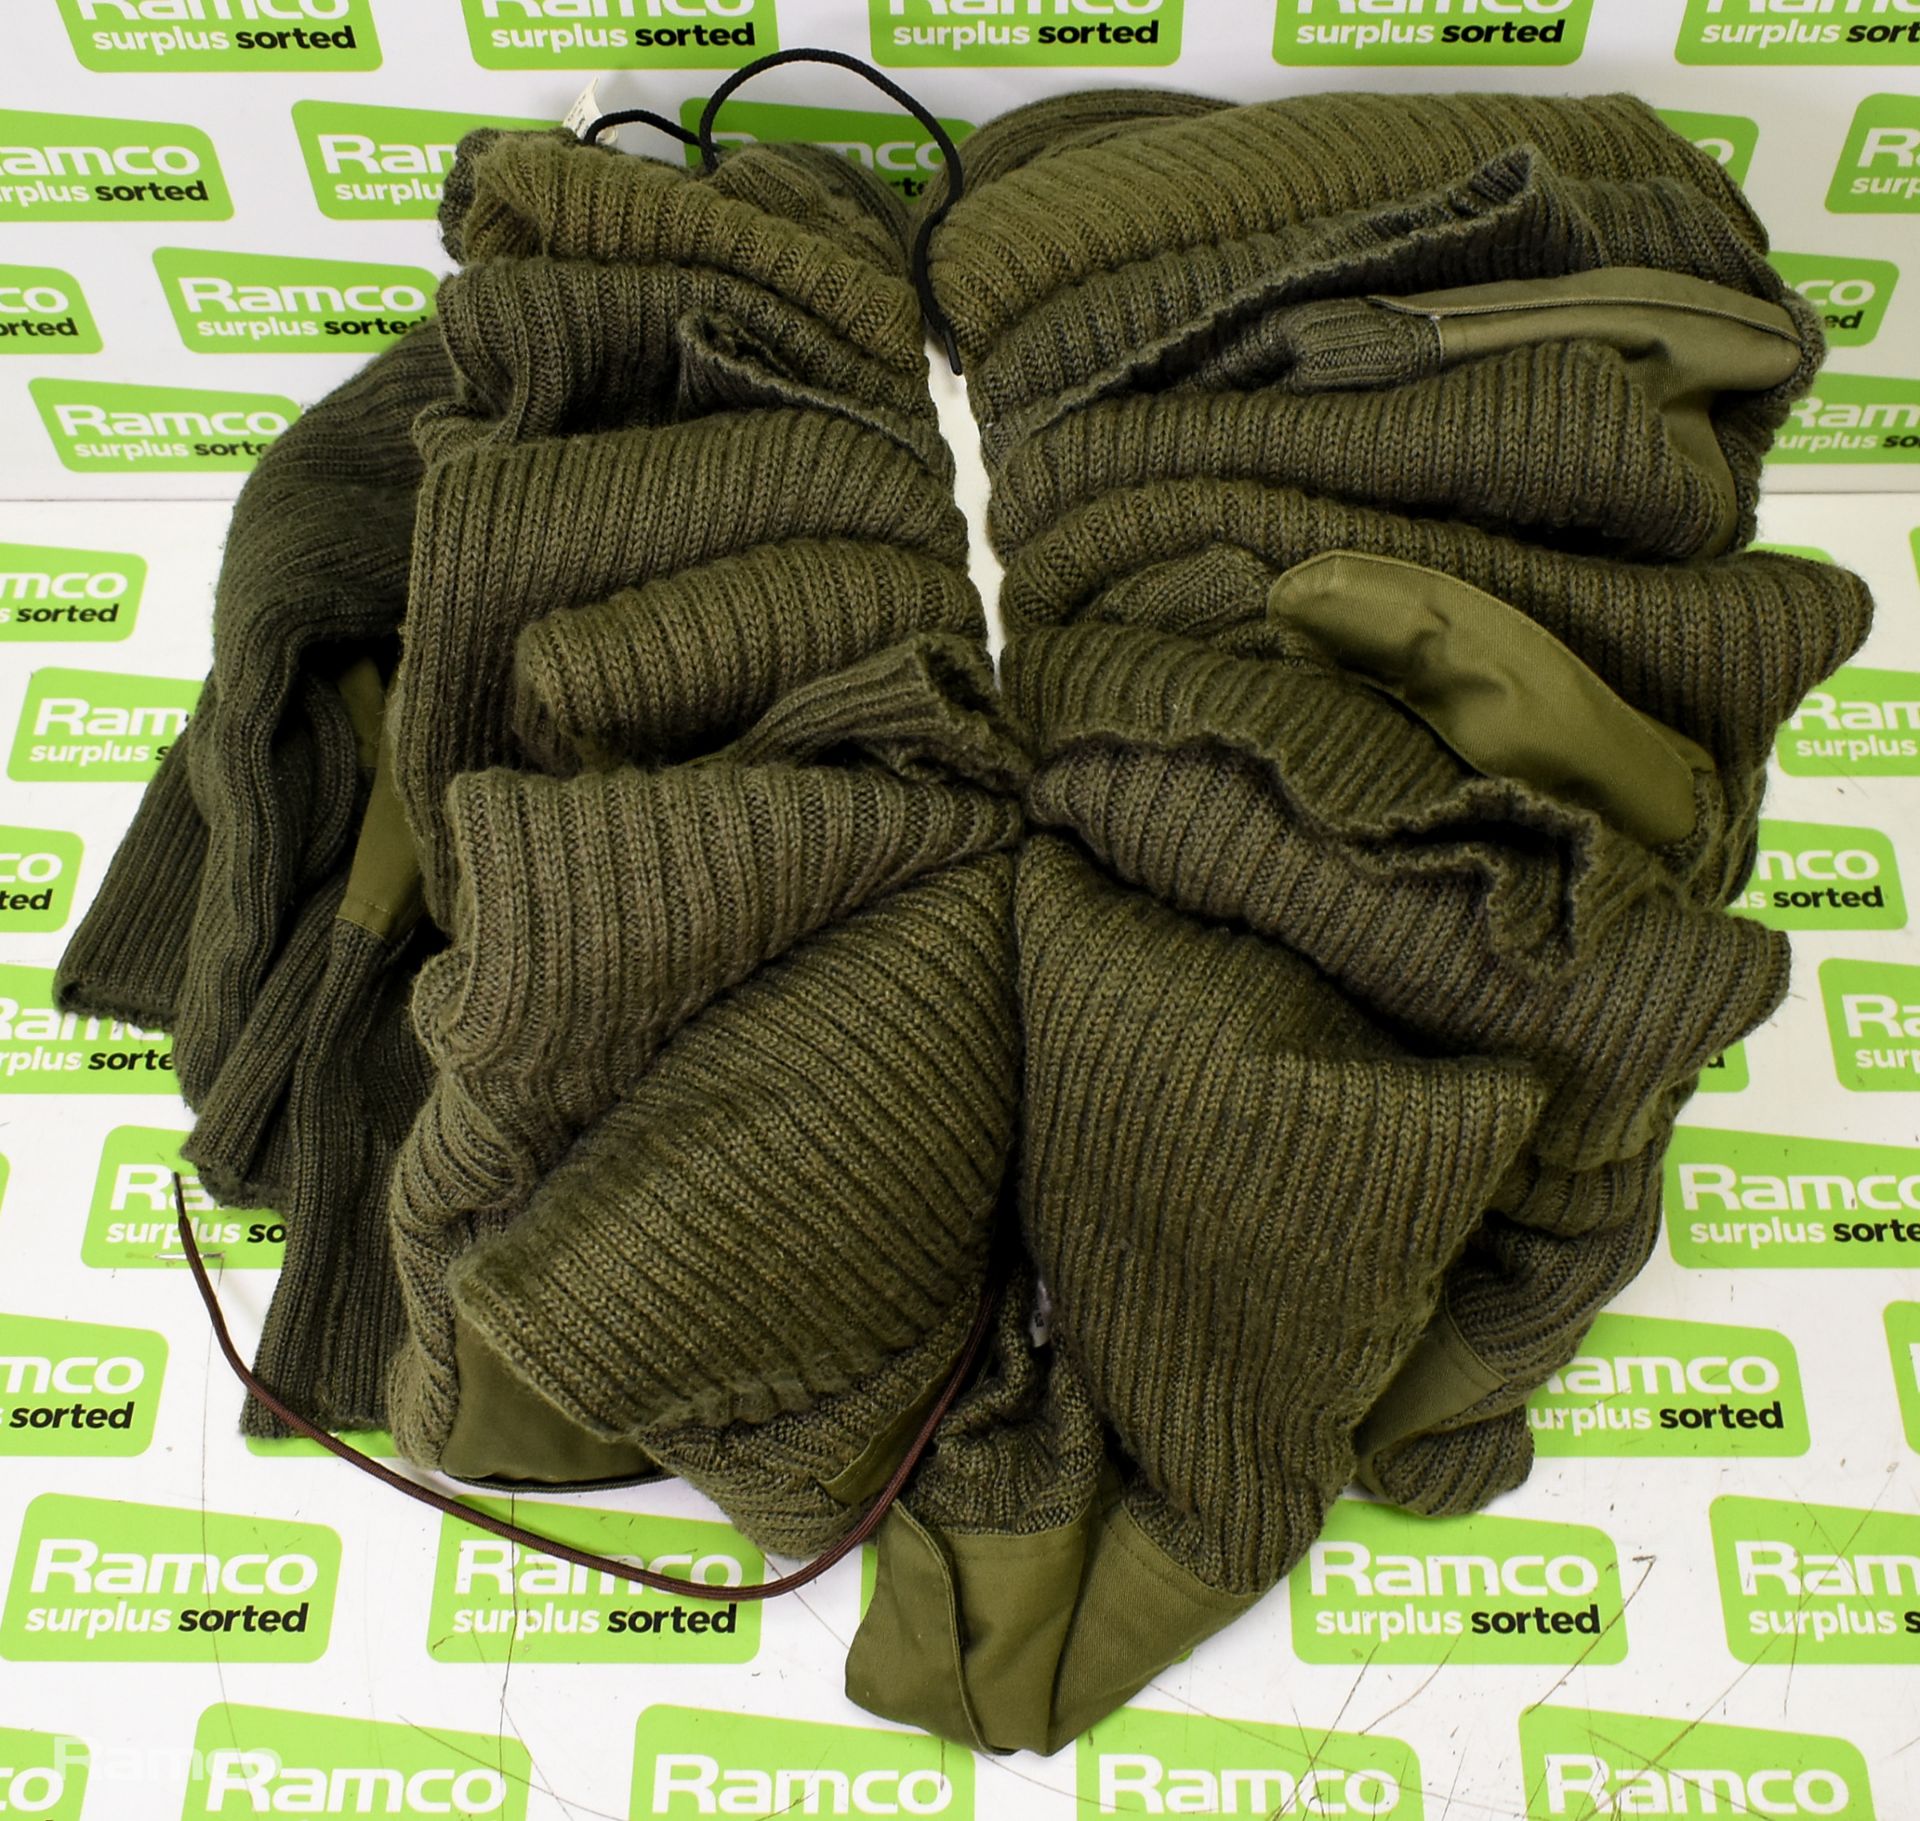 60x British Army wool jerseys - Olive - mixed grades and sizes - Image 10 of 10